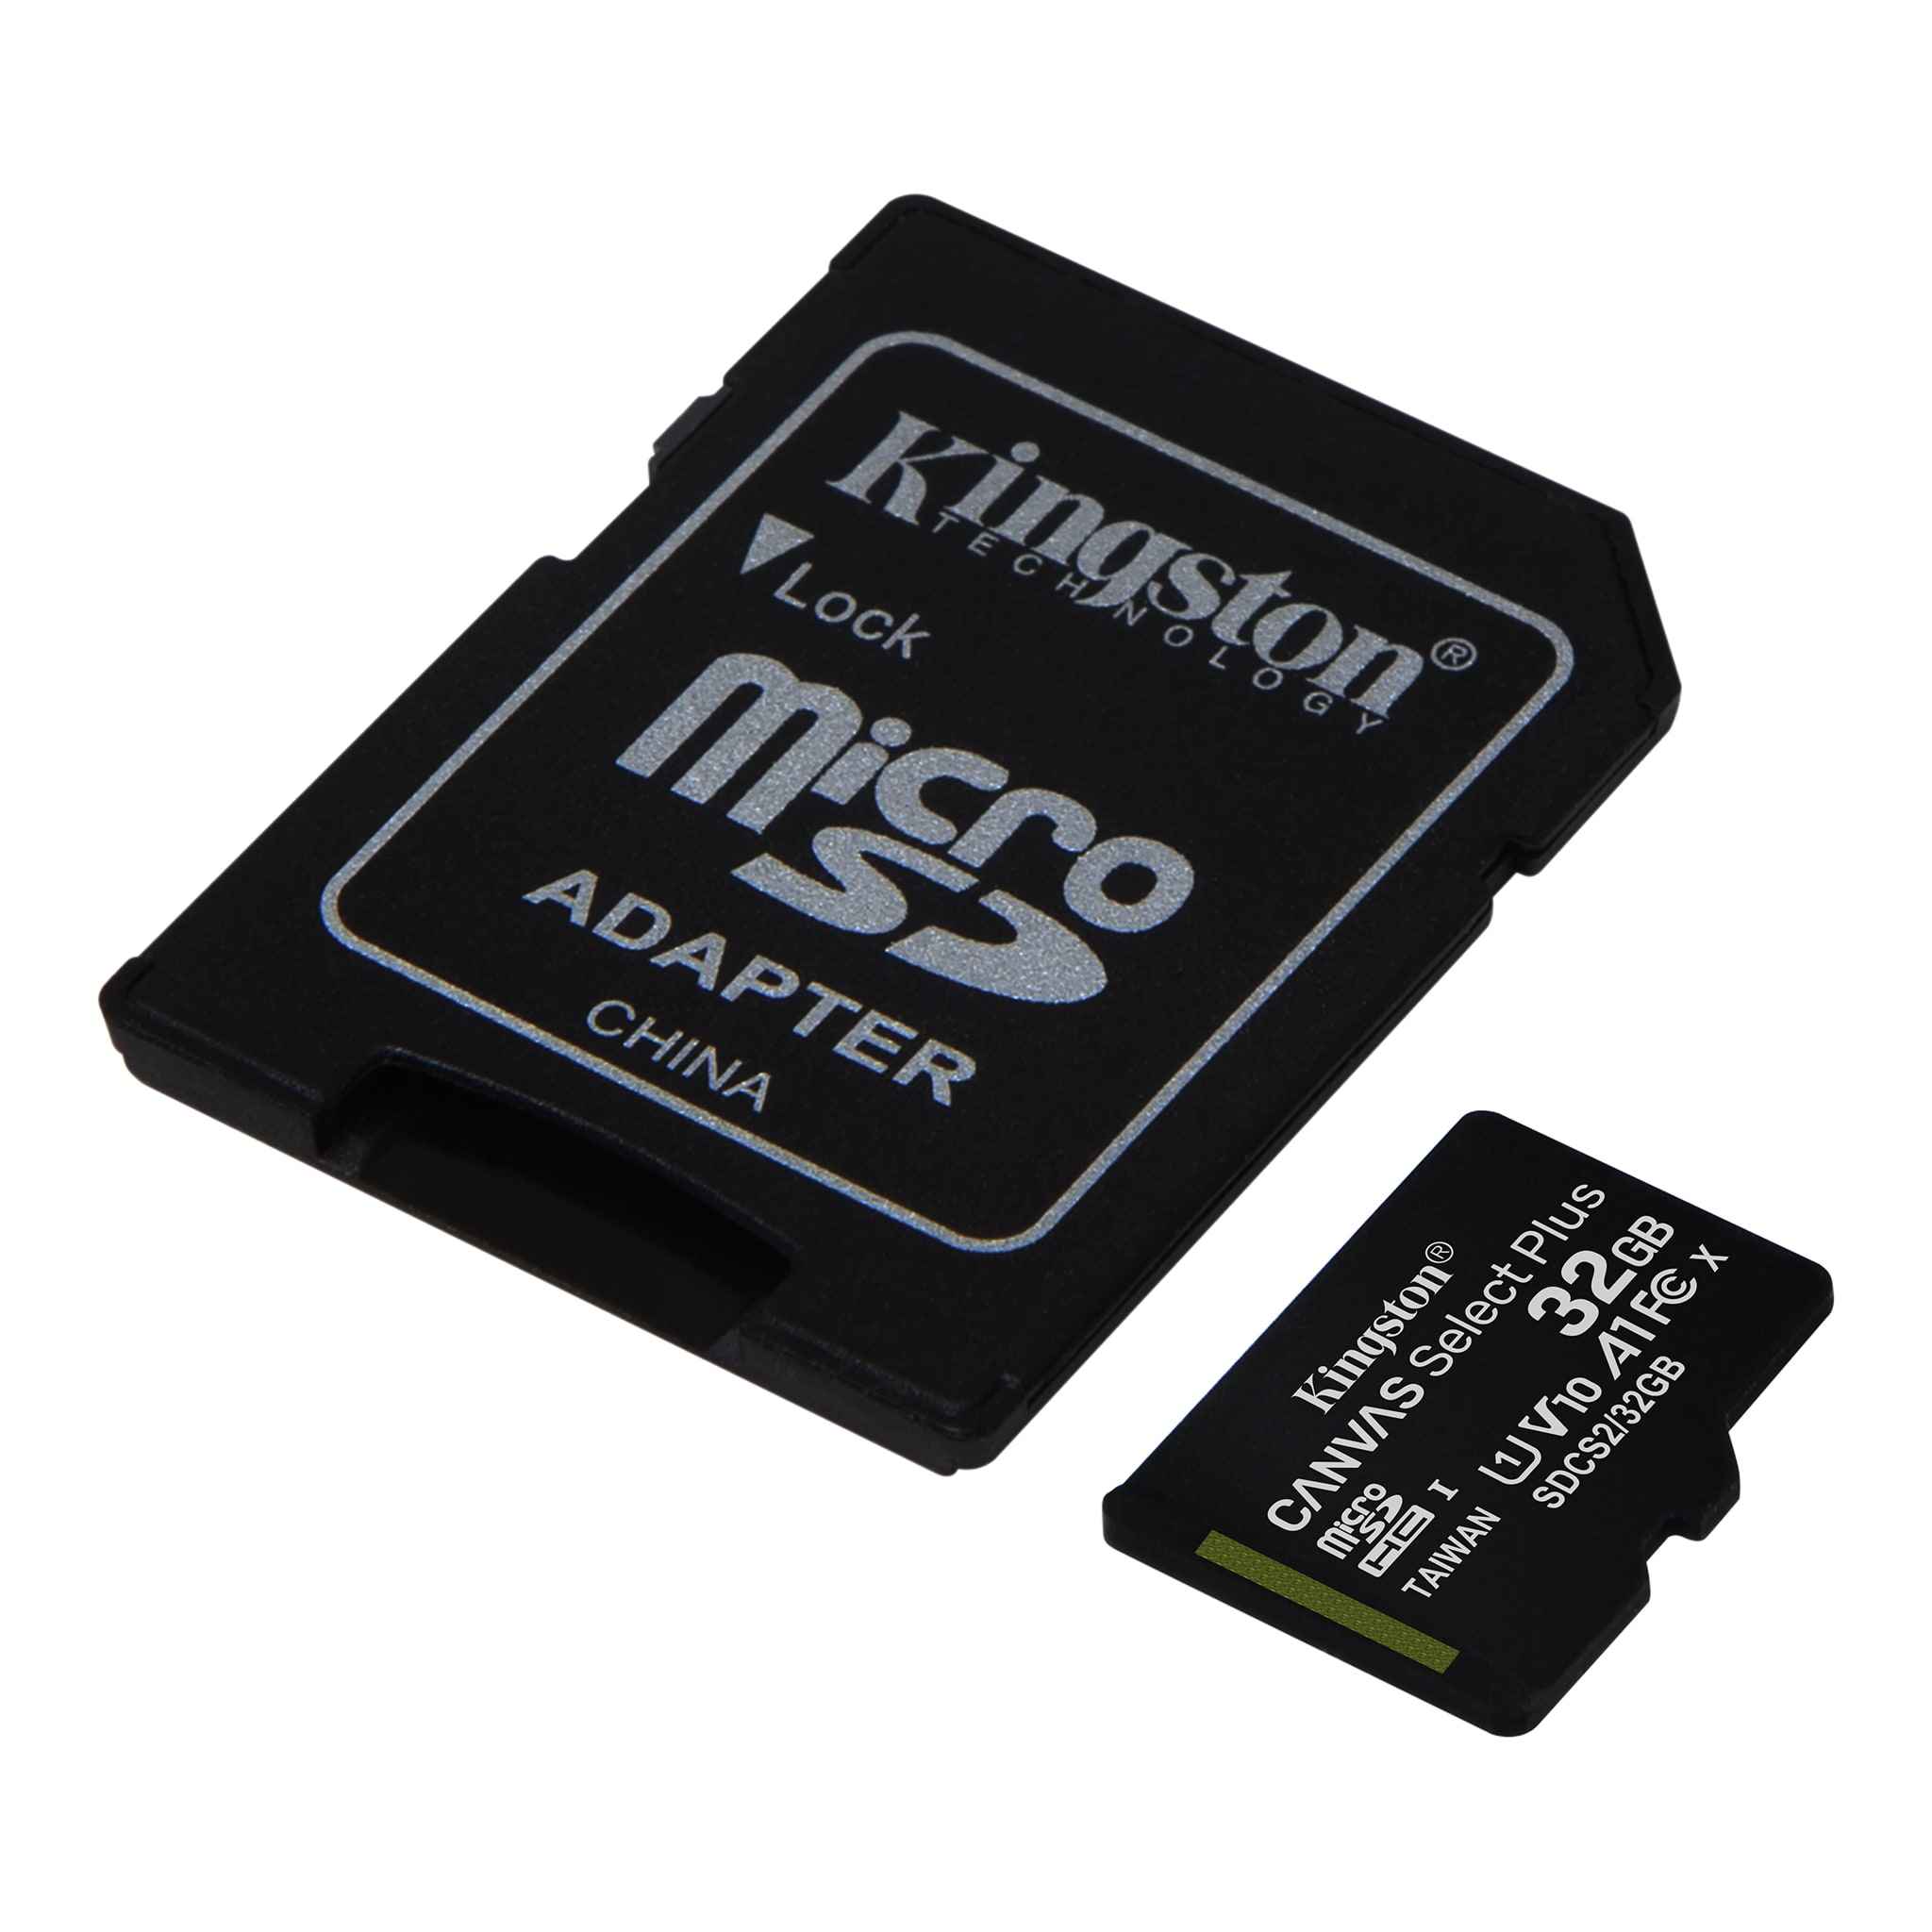 100MBs Works with Kingston Kingston 64GB Sony G3212 MicroSDXC Canvas Select Plus Card Verified by SanFlash.